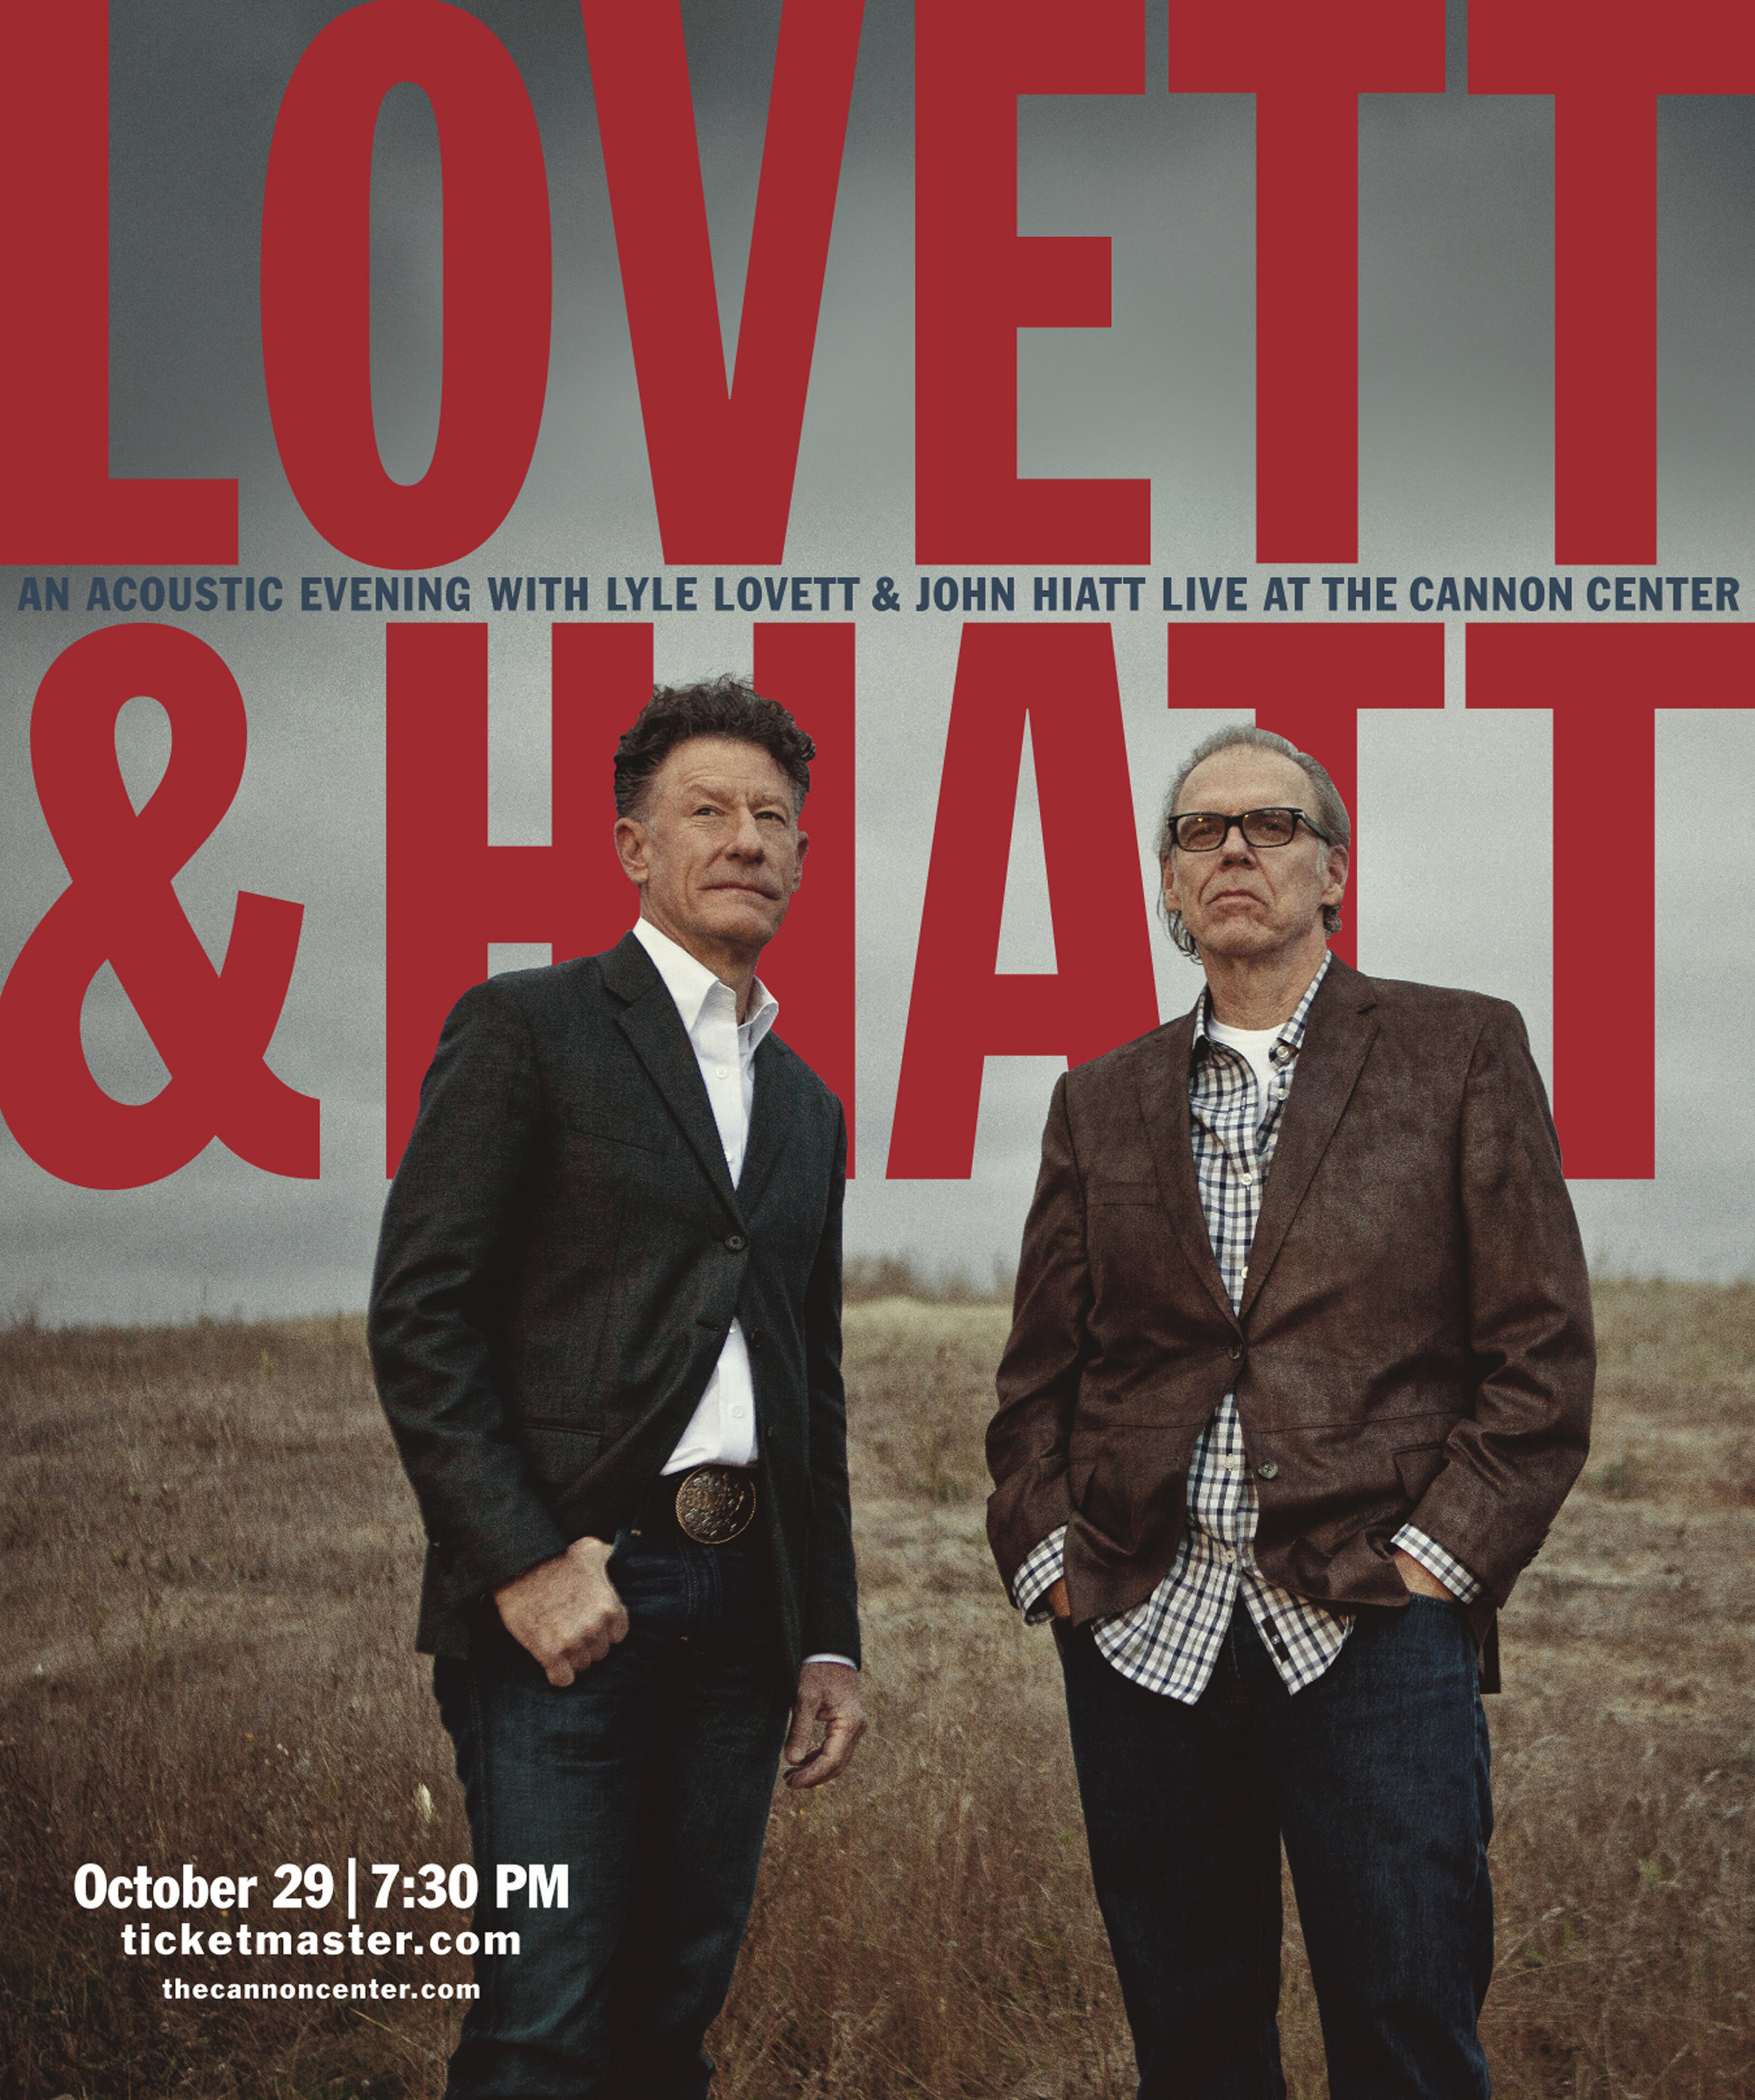  Lyle Lovett &amp; John Hyatt at the Cannon Center Memphis  Full-page print ad  Design and creative by Chuck Mitchell  Photograph © Michael Wilson 